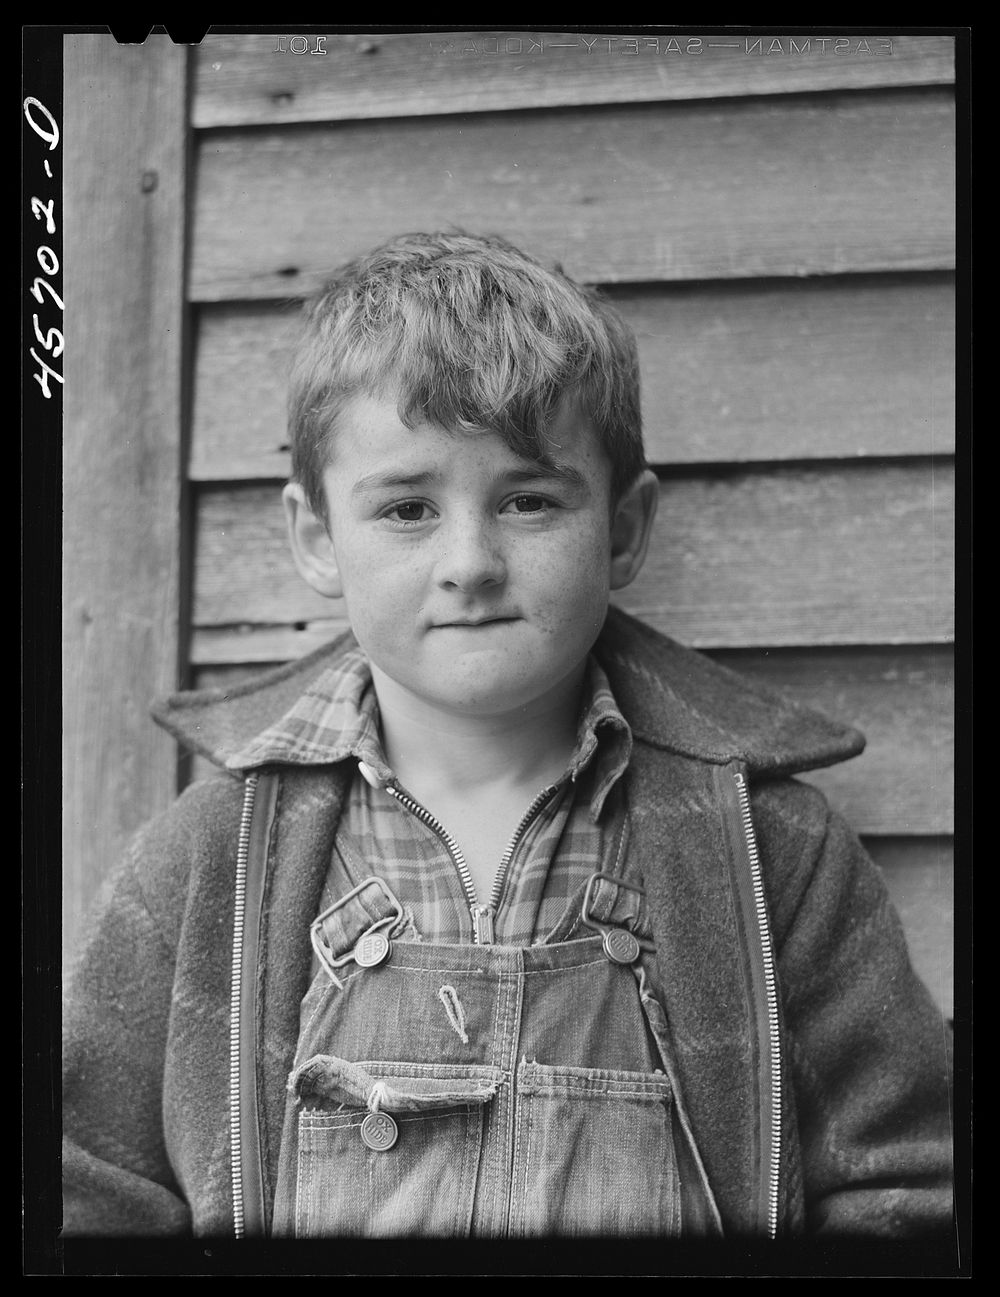 [Untitled photo, possibly related to: Bobby Gaynor, who lives with his family on a farm near Fairfield, Vermont]. Sourced…